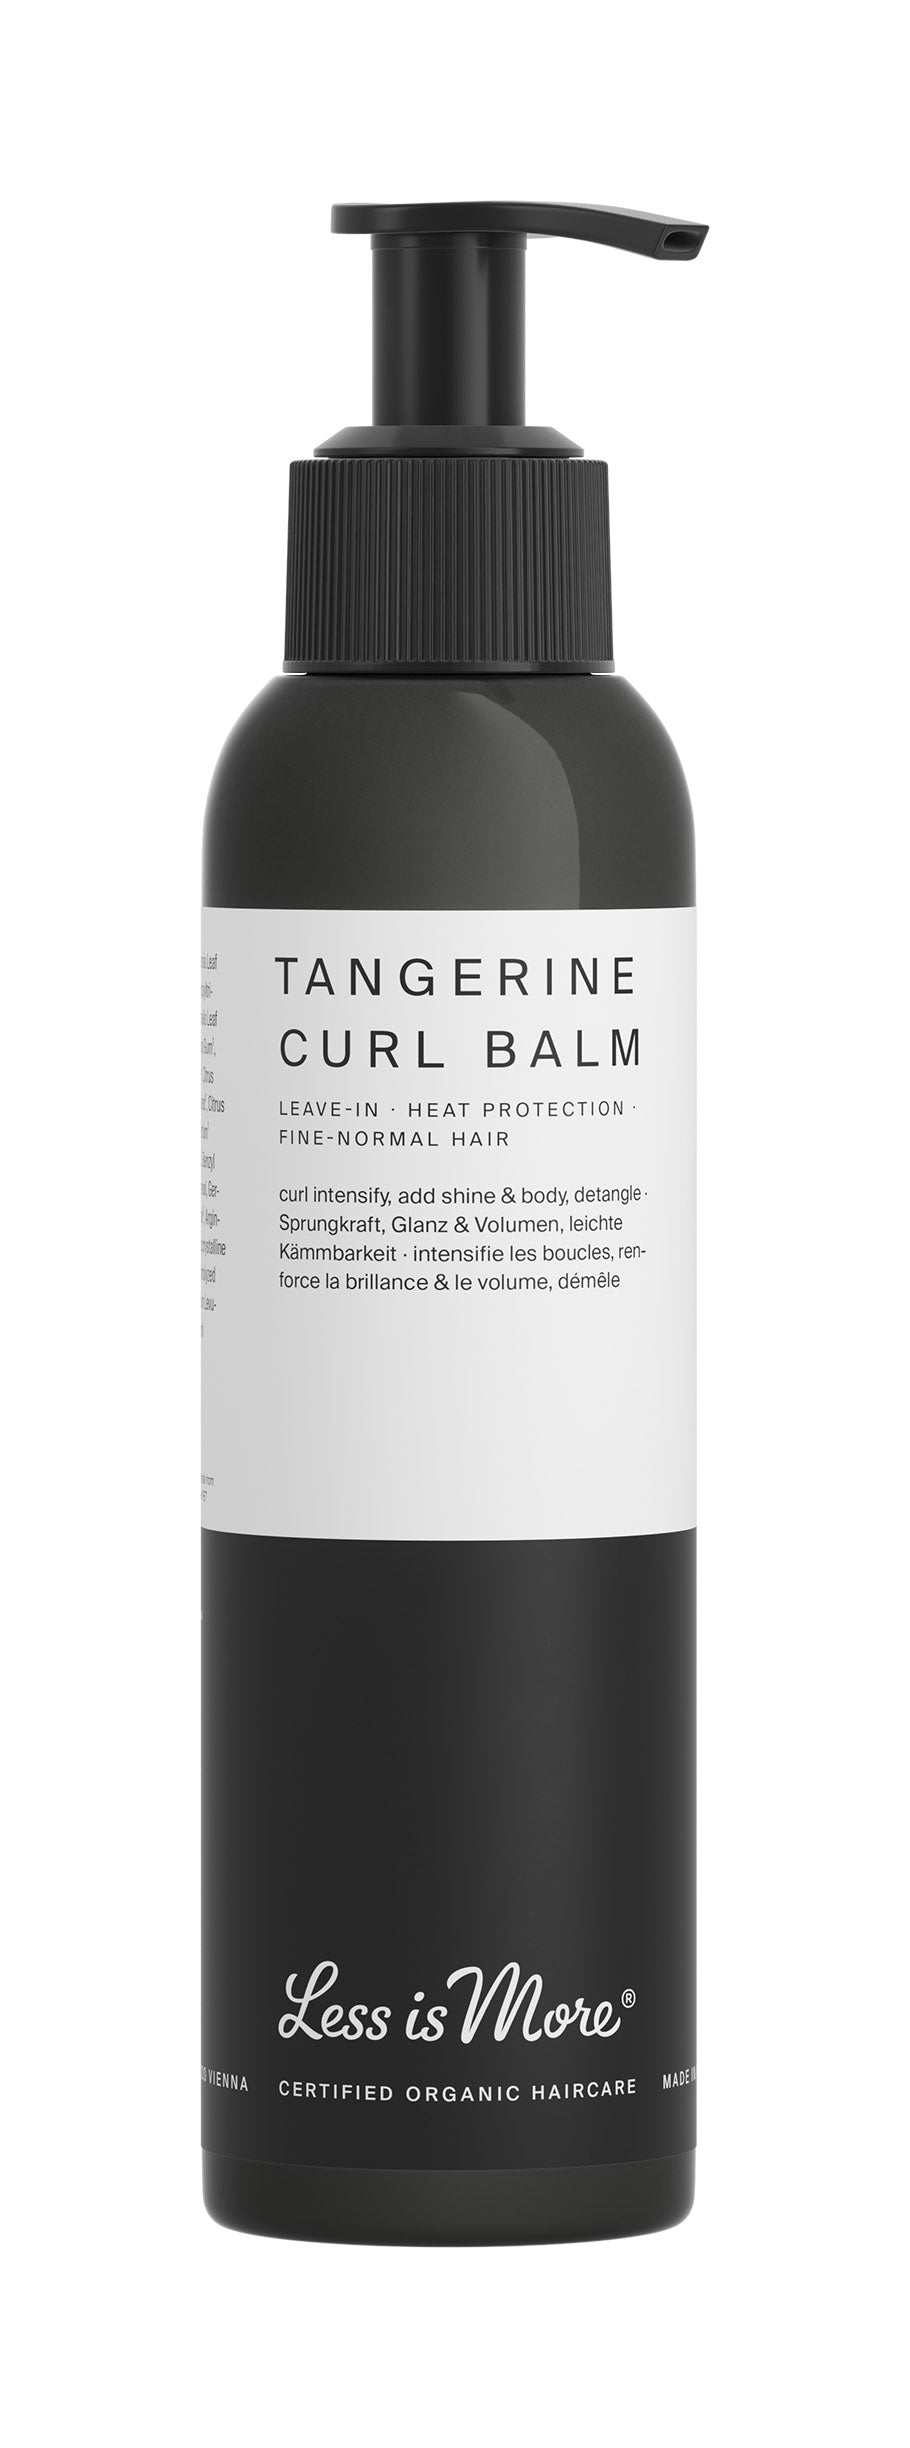 Less is More - Tangerine Curl Balm 150ml